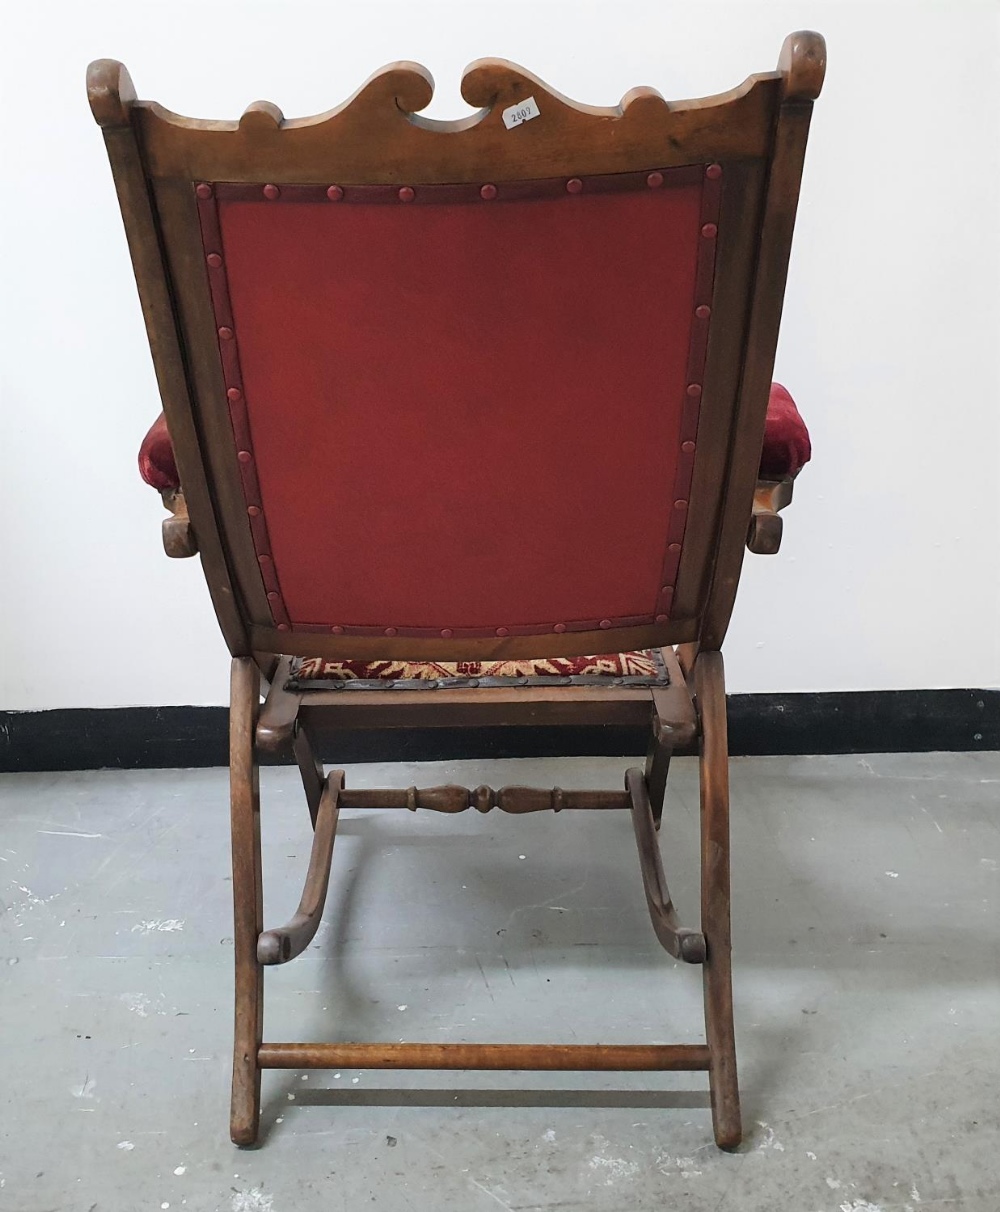 Victorian campaign chair, 87 x 58 x 62 cm - Image 4 of 5